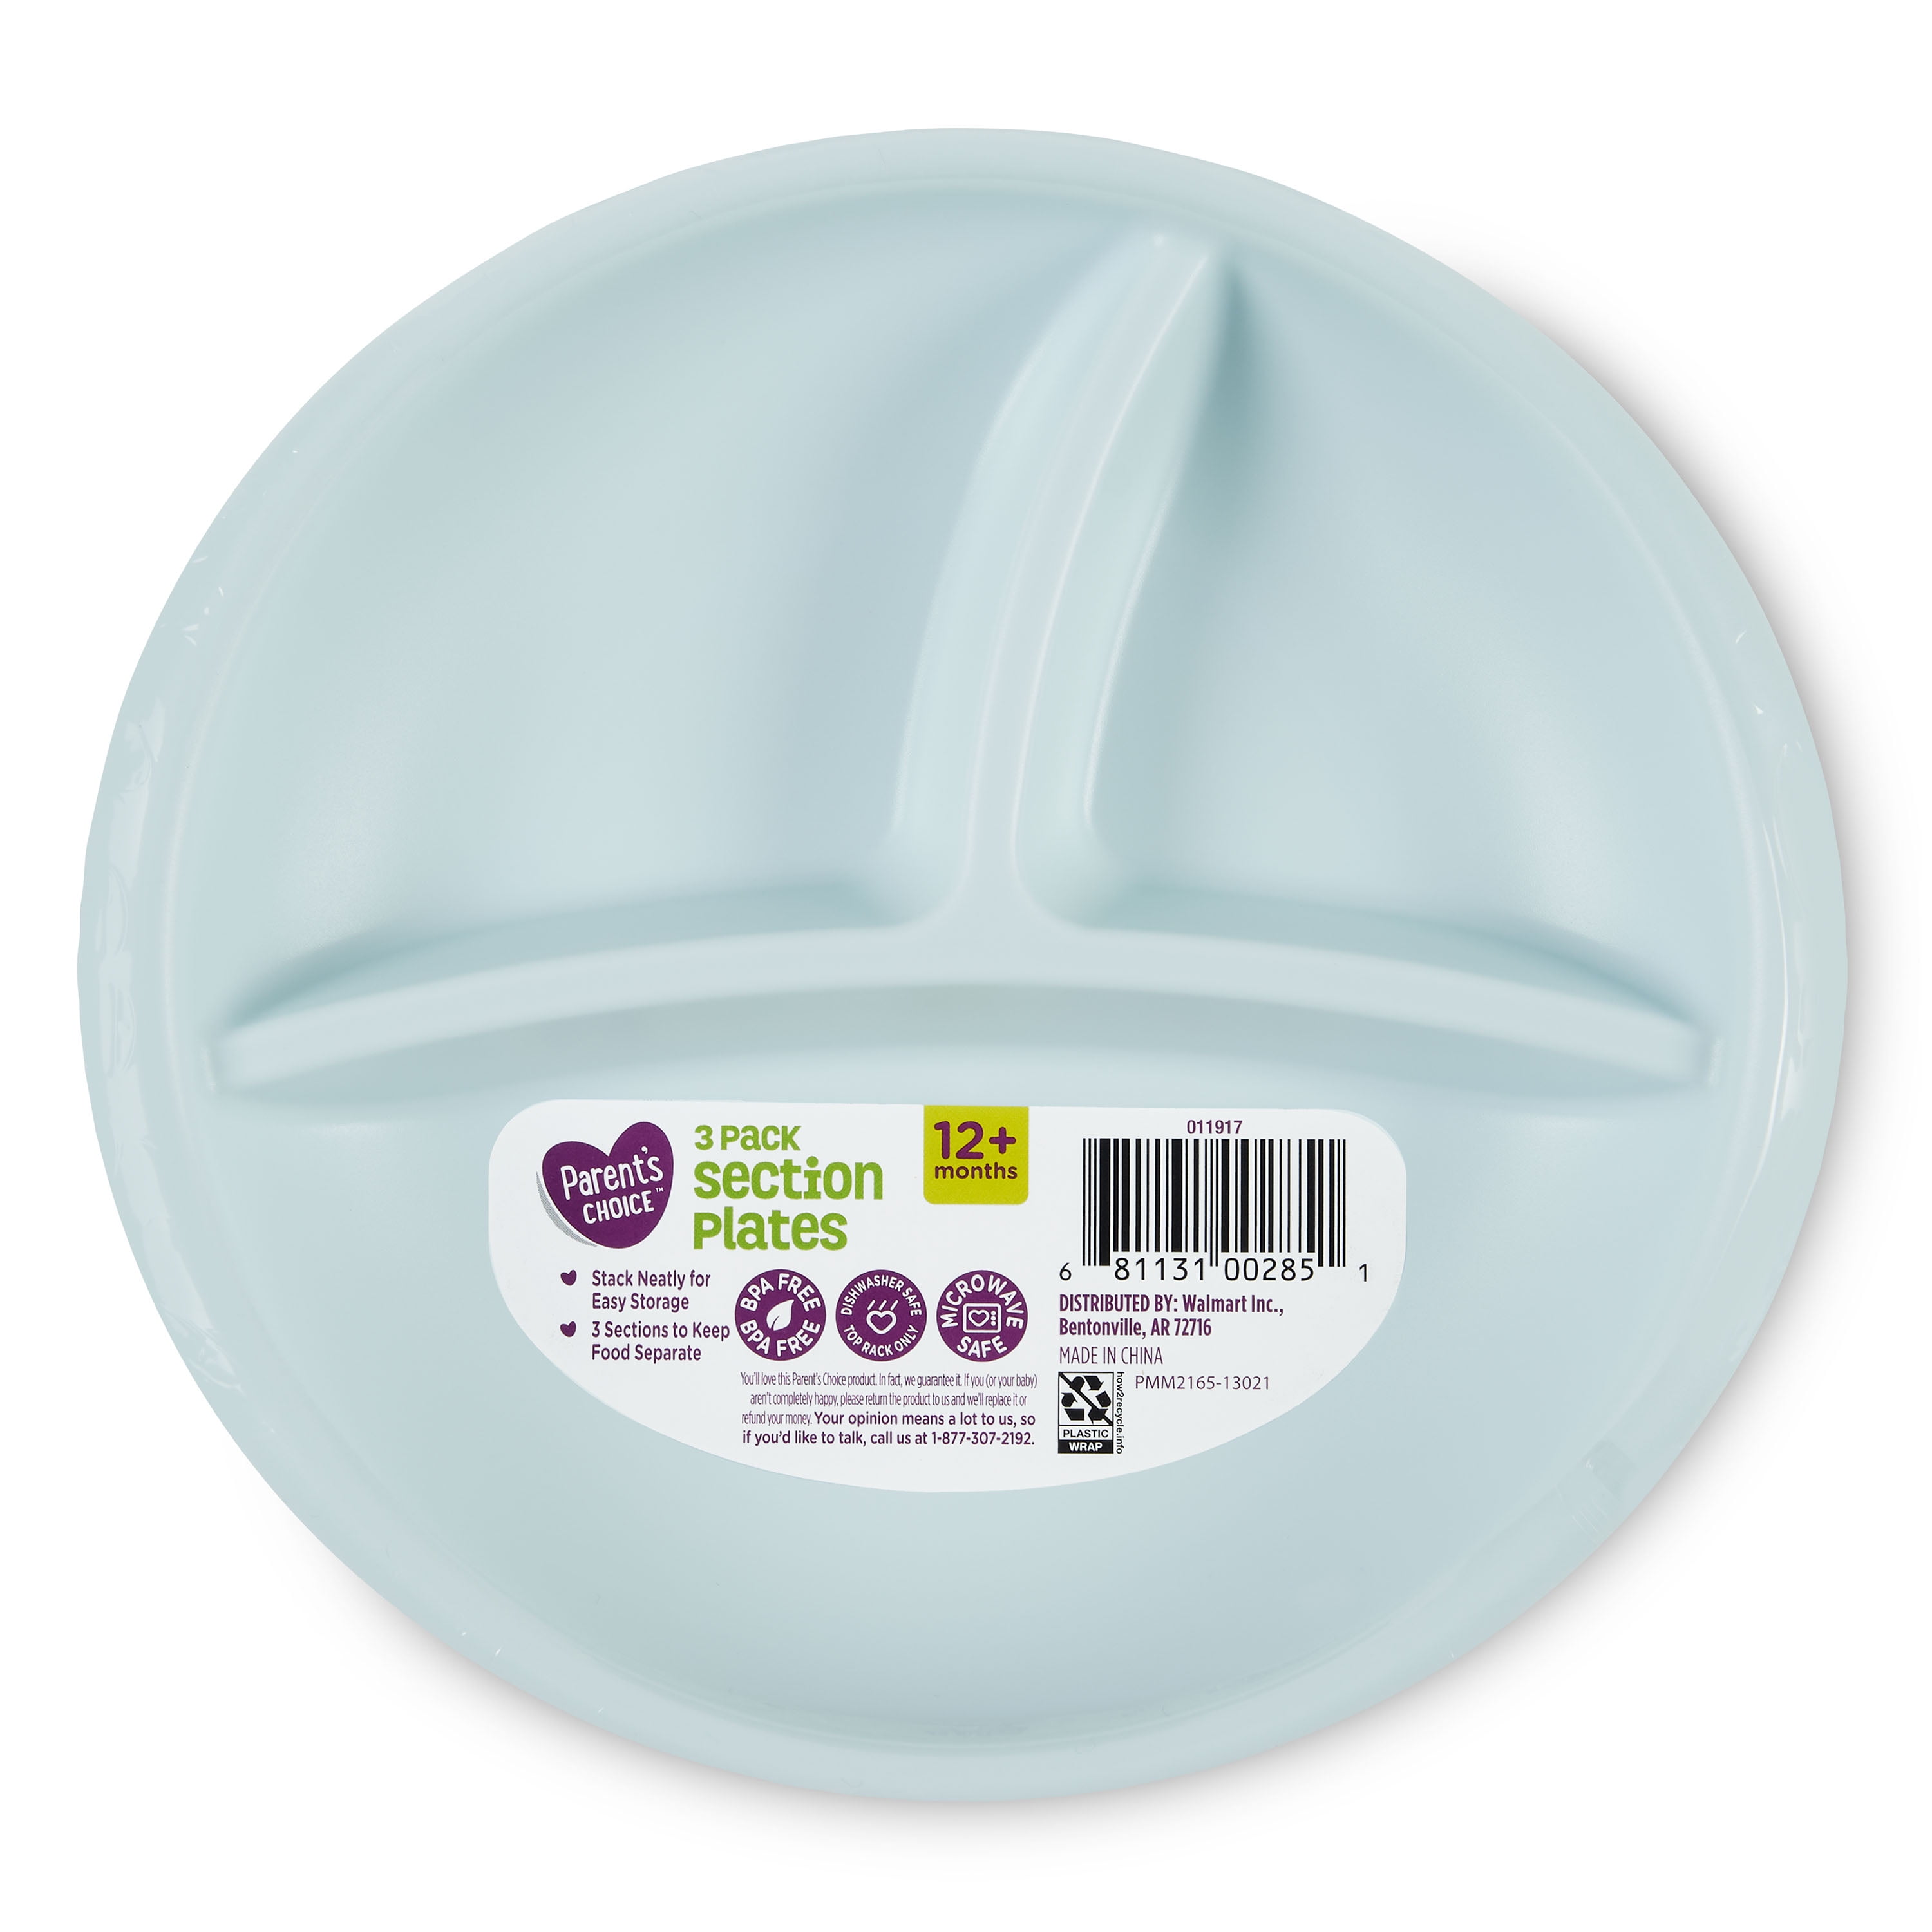 Parent's Choice 3 Compartment Section Plate, Toddlers Aged 12 Months and up, 3 Count, Gender Neutral